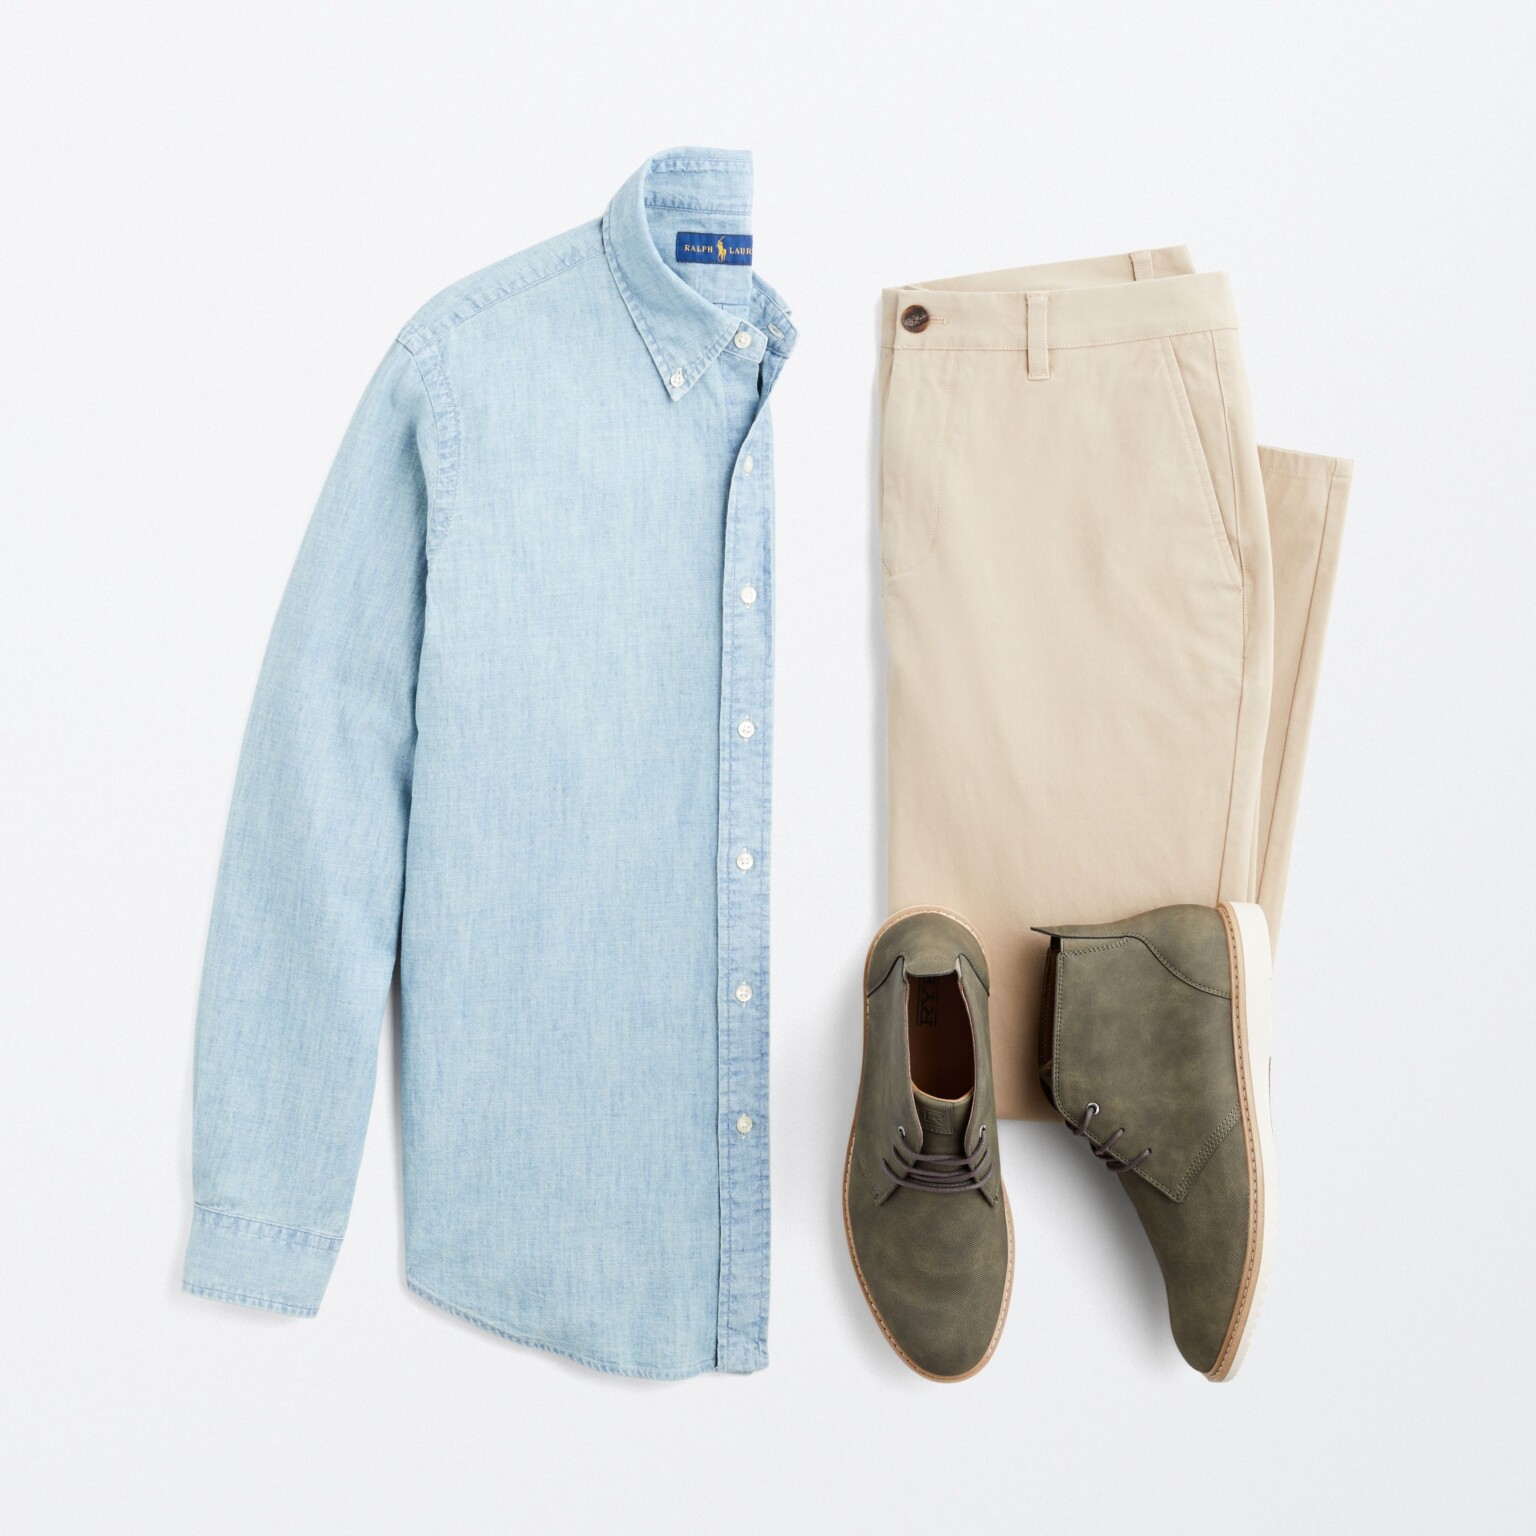 3 Workwear Formulas for Every Office | Stitch Fix Men